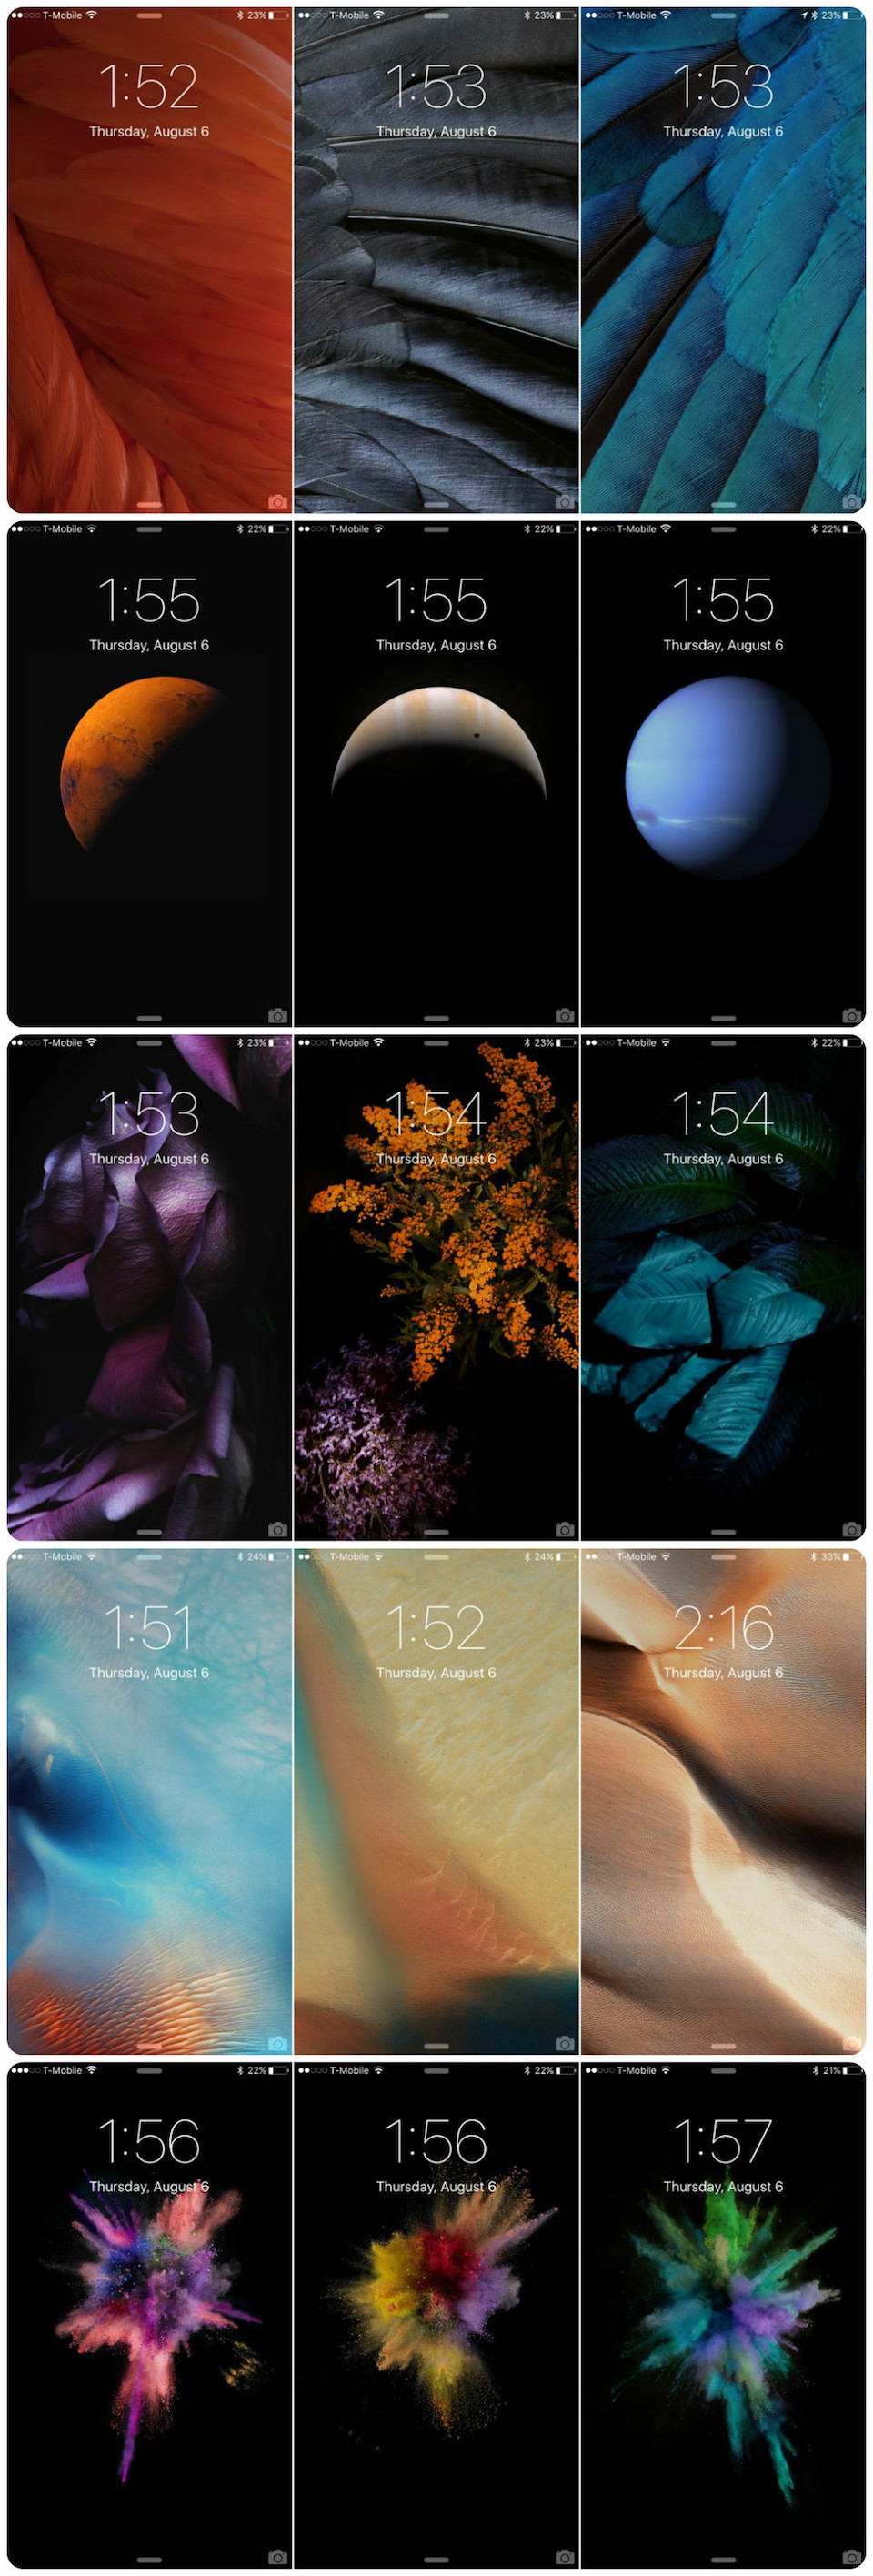 Download the 15 new iOS 9 wallpapers